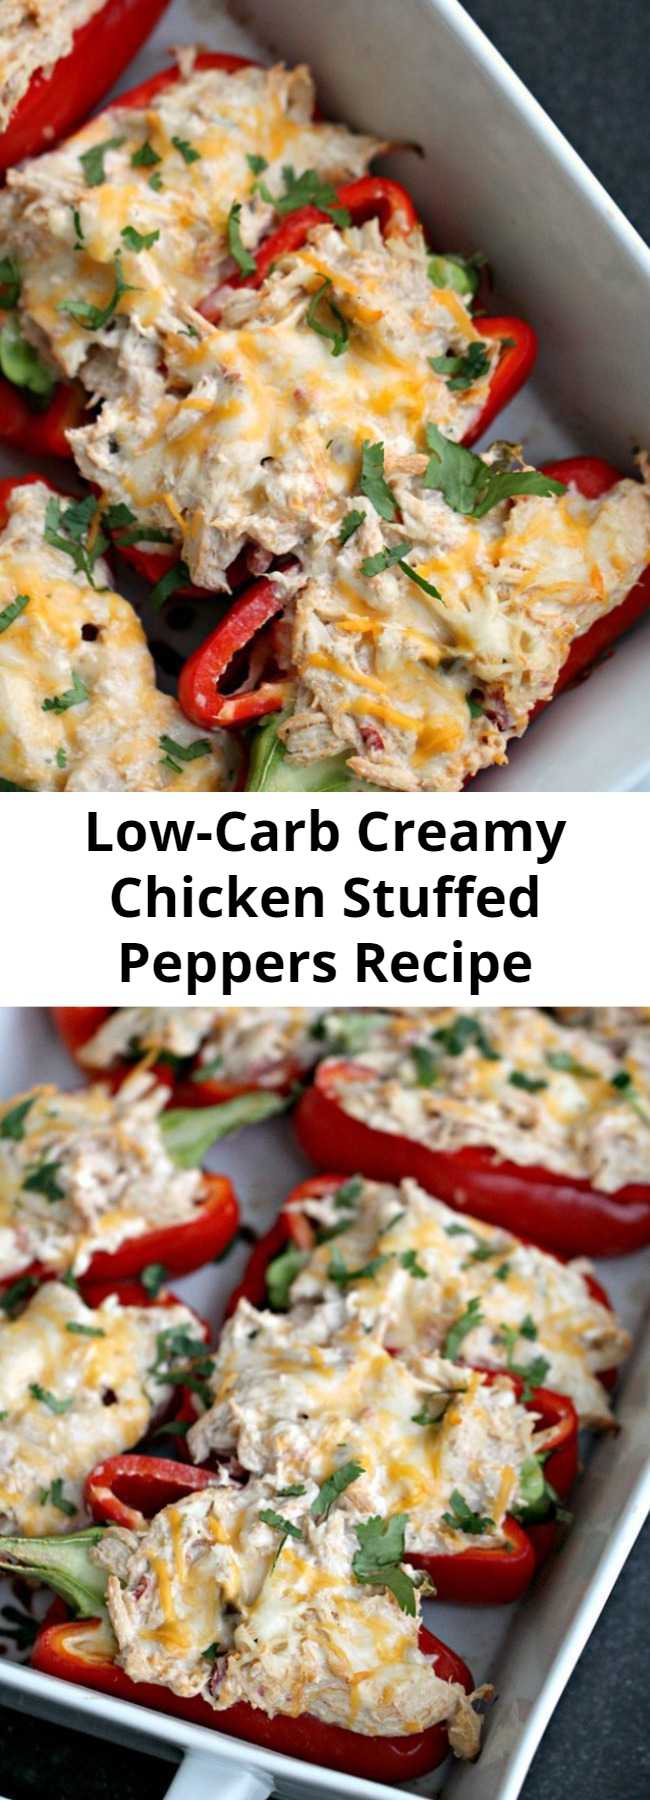 Low-Carb Creamy Chicken Stuffed Peppers Recipe - A delicious and healthy low-carb meal that’s ready in minutes. These Creamy Chicken Stuffed Peppers will soon become a favorite at your house. Made using chicken that has been cooked and shredded, light cream cheese, jalapeno, spices, and salsa and then topped with some fresh cilantro - it's low-carb dinner perfection!